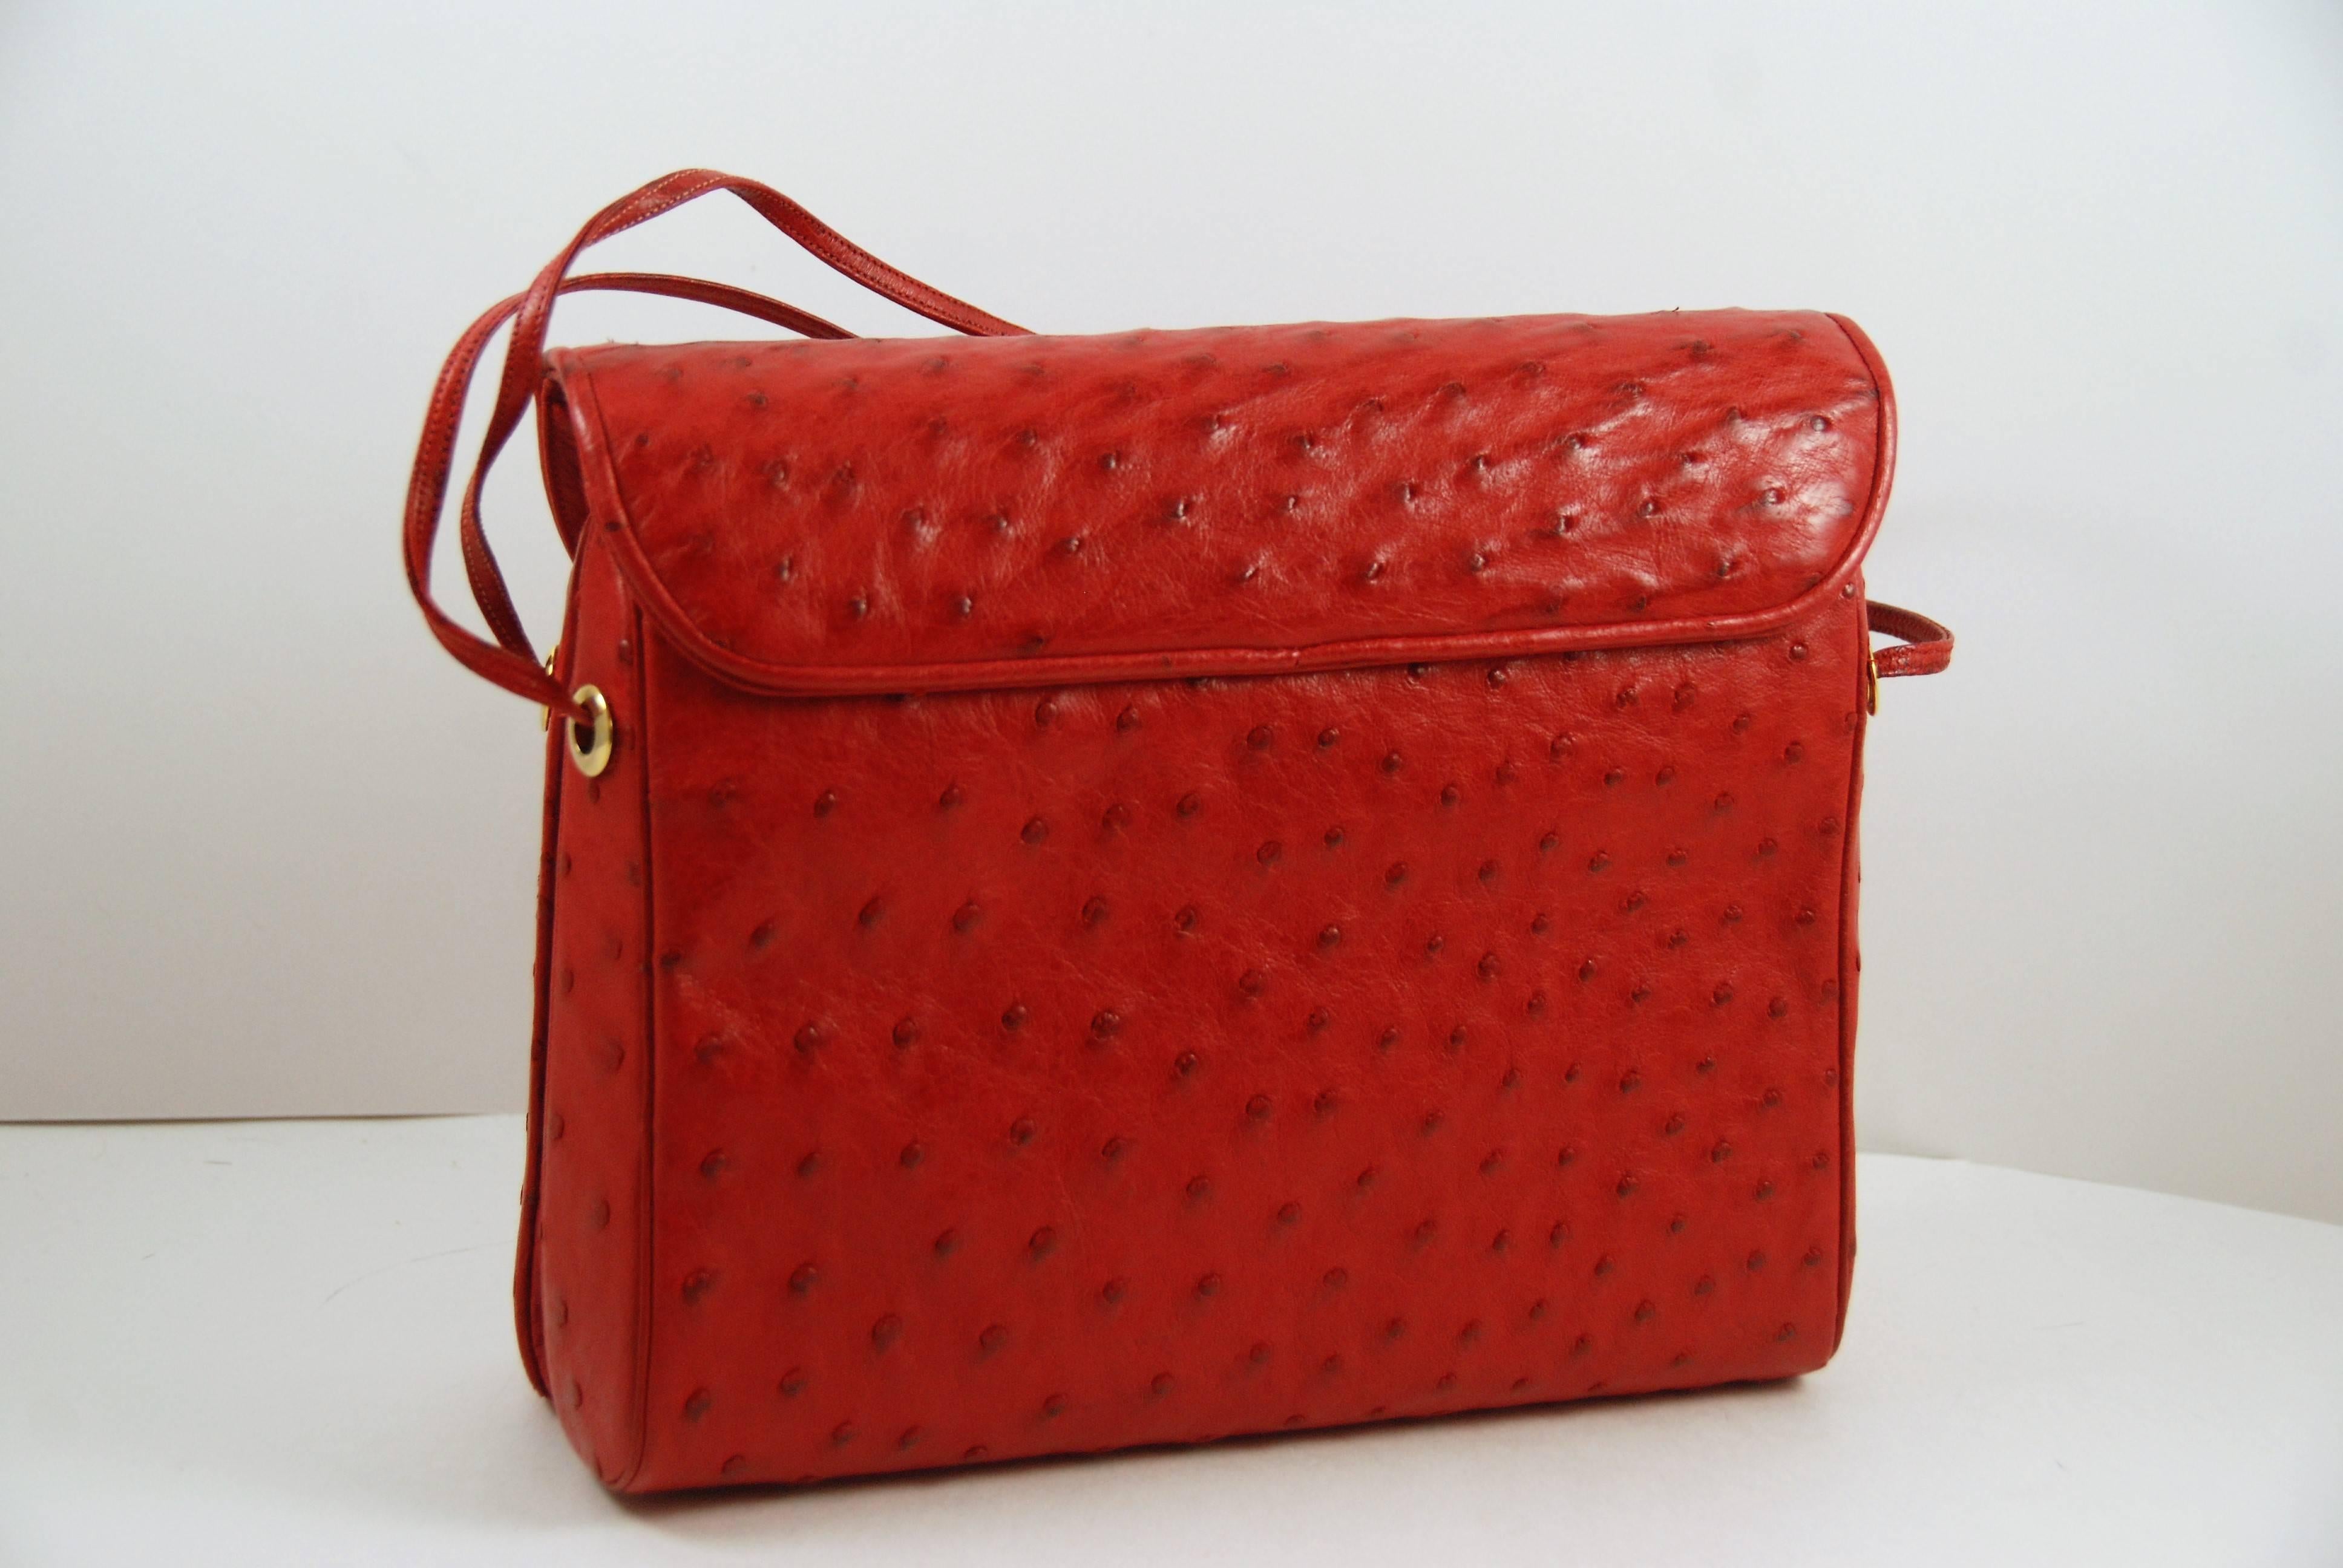 Judith Leiber shoulder bag is done in vibrant geranium red ostrich and features a flap top with magnetic snap closure. It has a double red ostrich shoulder strap and gold tone hardware. The interior is done in red canvas and has one large main